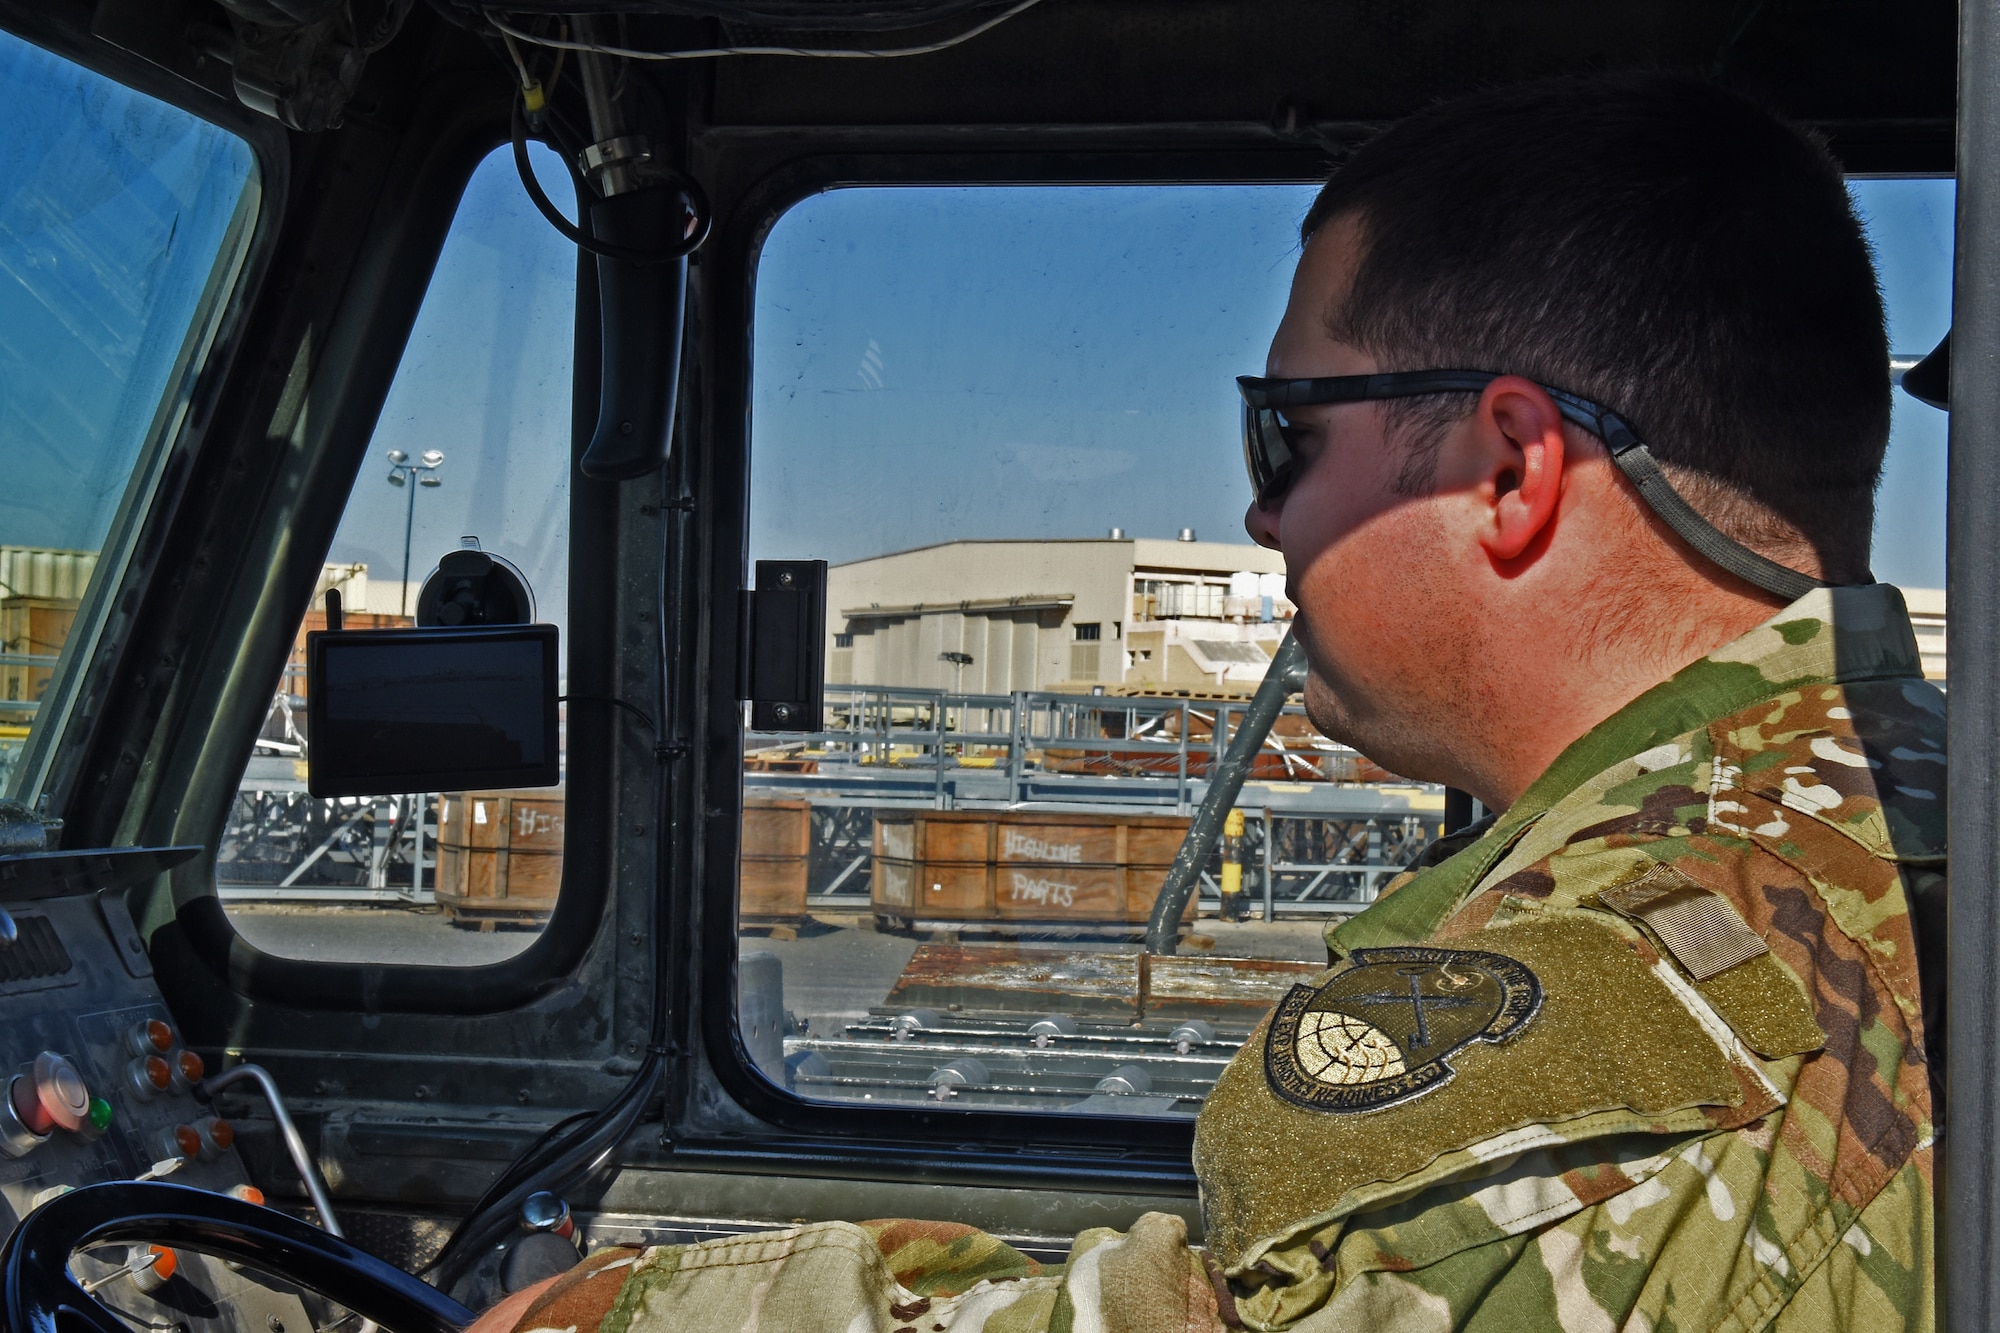 An Airman uses the backup monitor display while backing up the Tunner 60K Loader at an undisclosed location in Southwest Asia, Jan. 2, 2019. Although the camera provides the driver a view of what is behind them, they will still use the traditional spotter to assist in guiding.